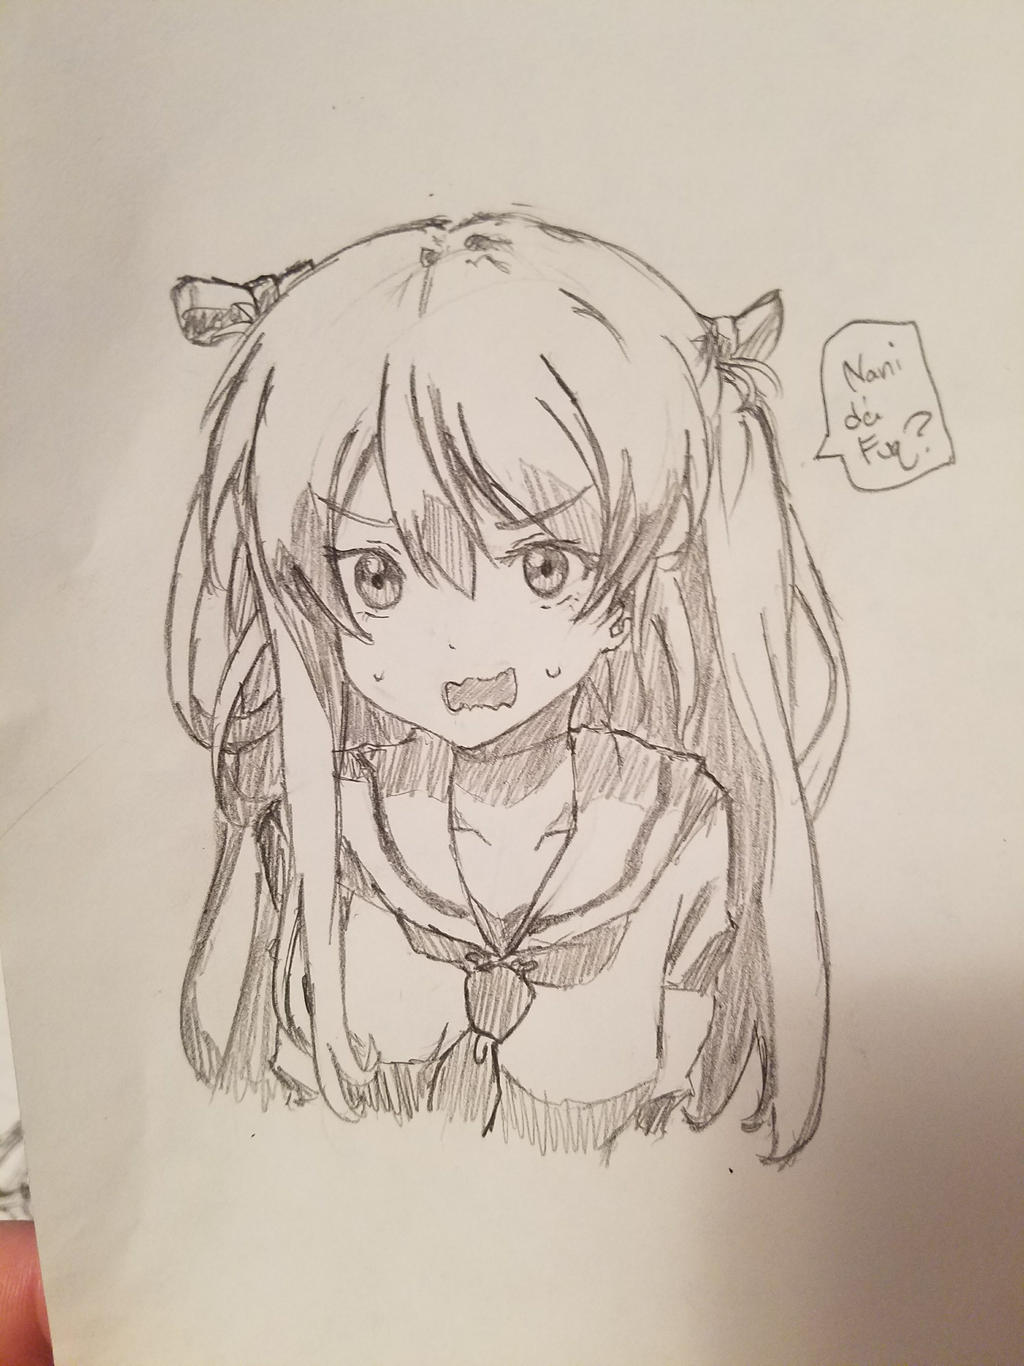 Funny cute anime drawing by Miniomegaxis on DeviantArt